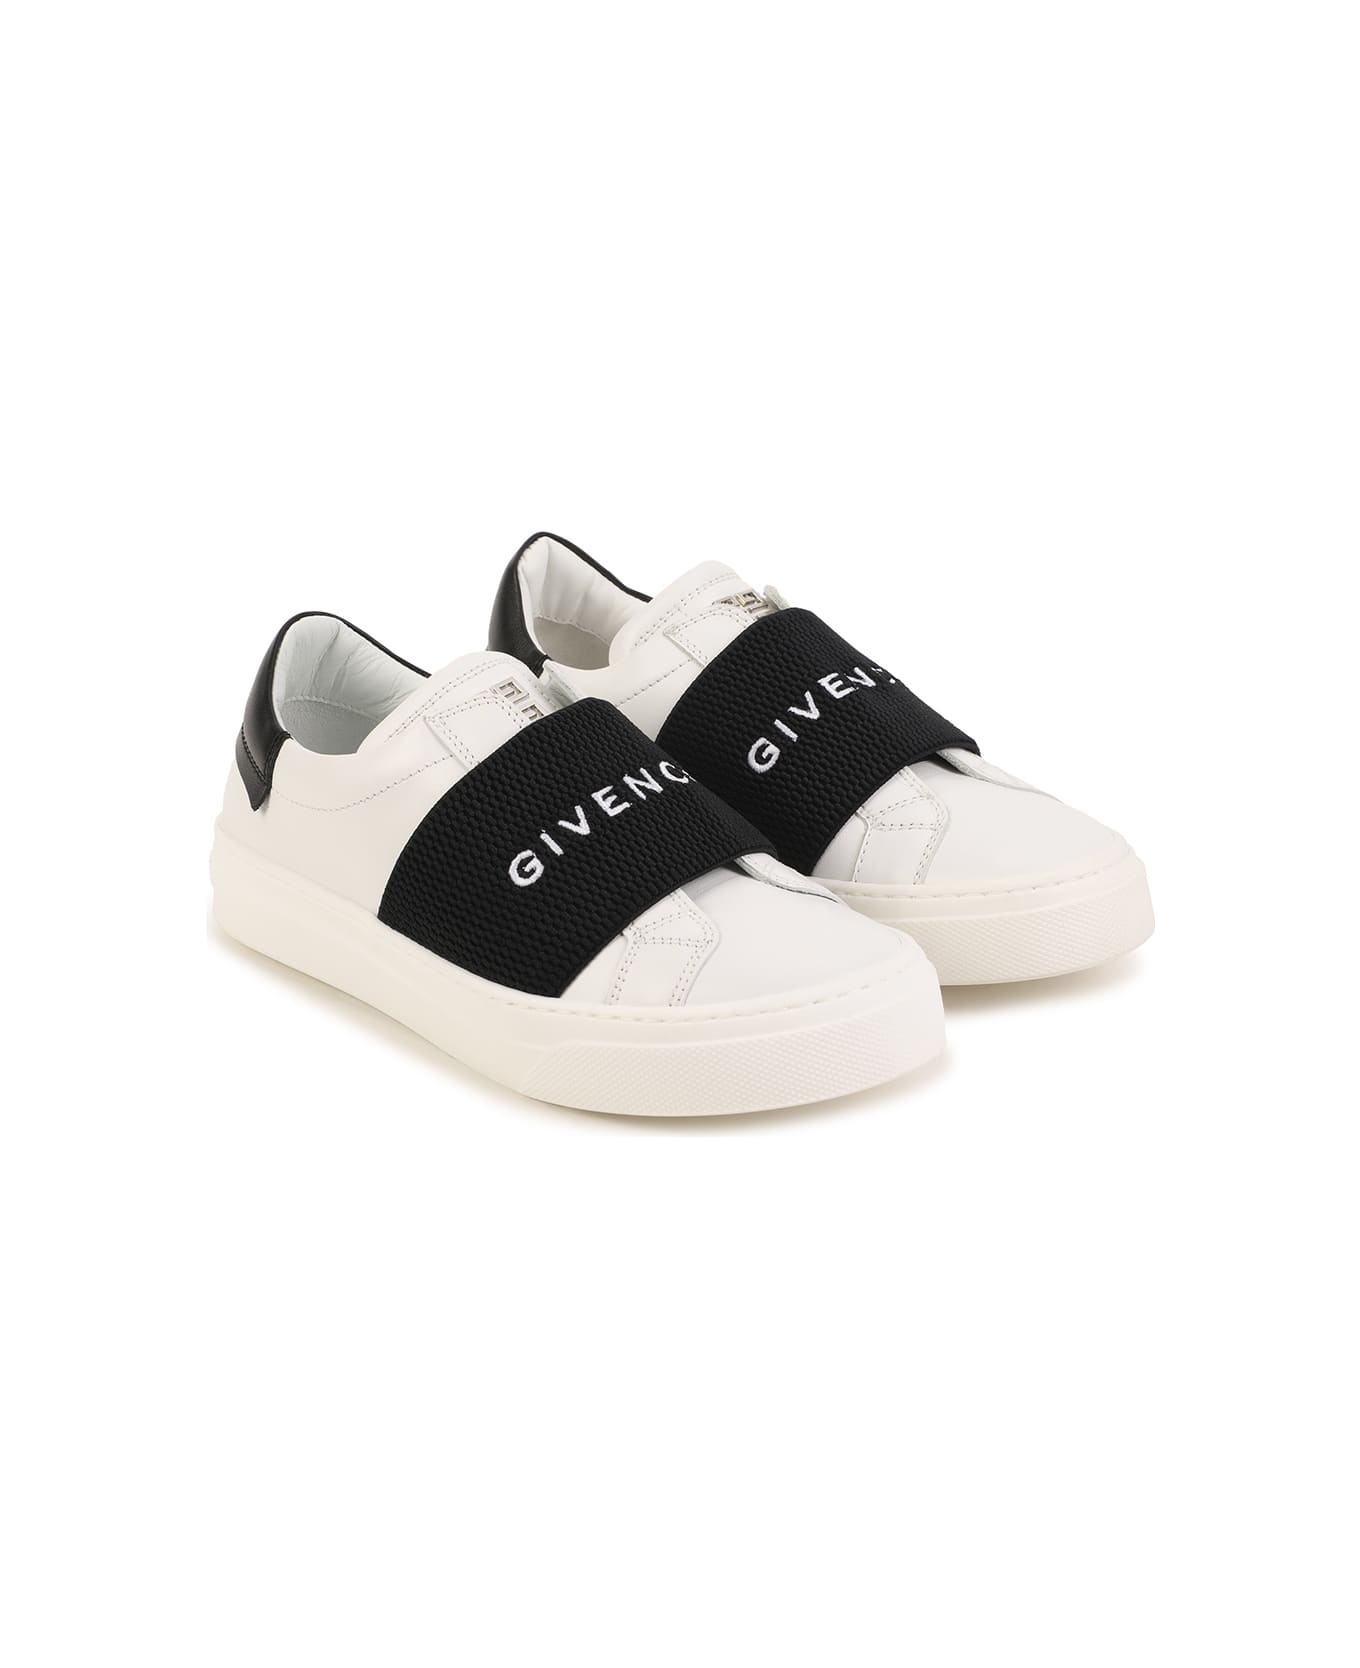 Givenchy White Urban Street Sneakers With Black Logo Band - Bianco